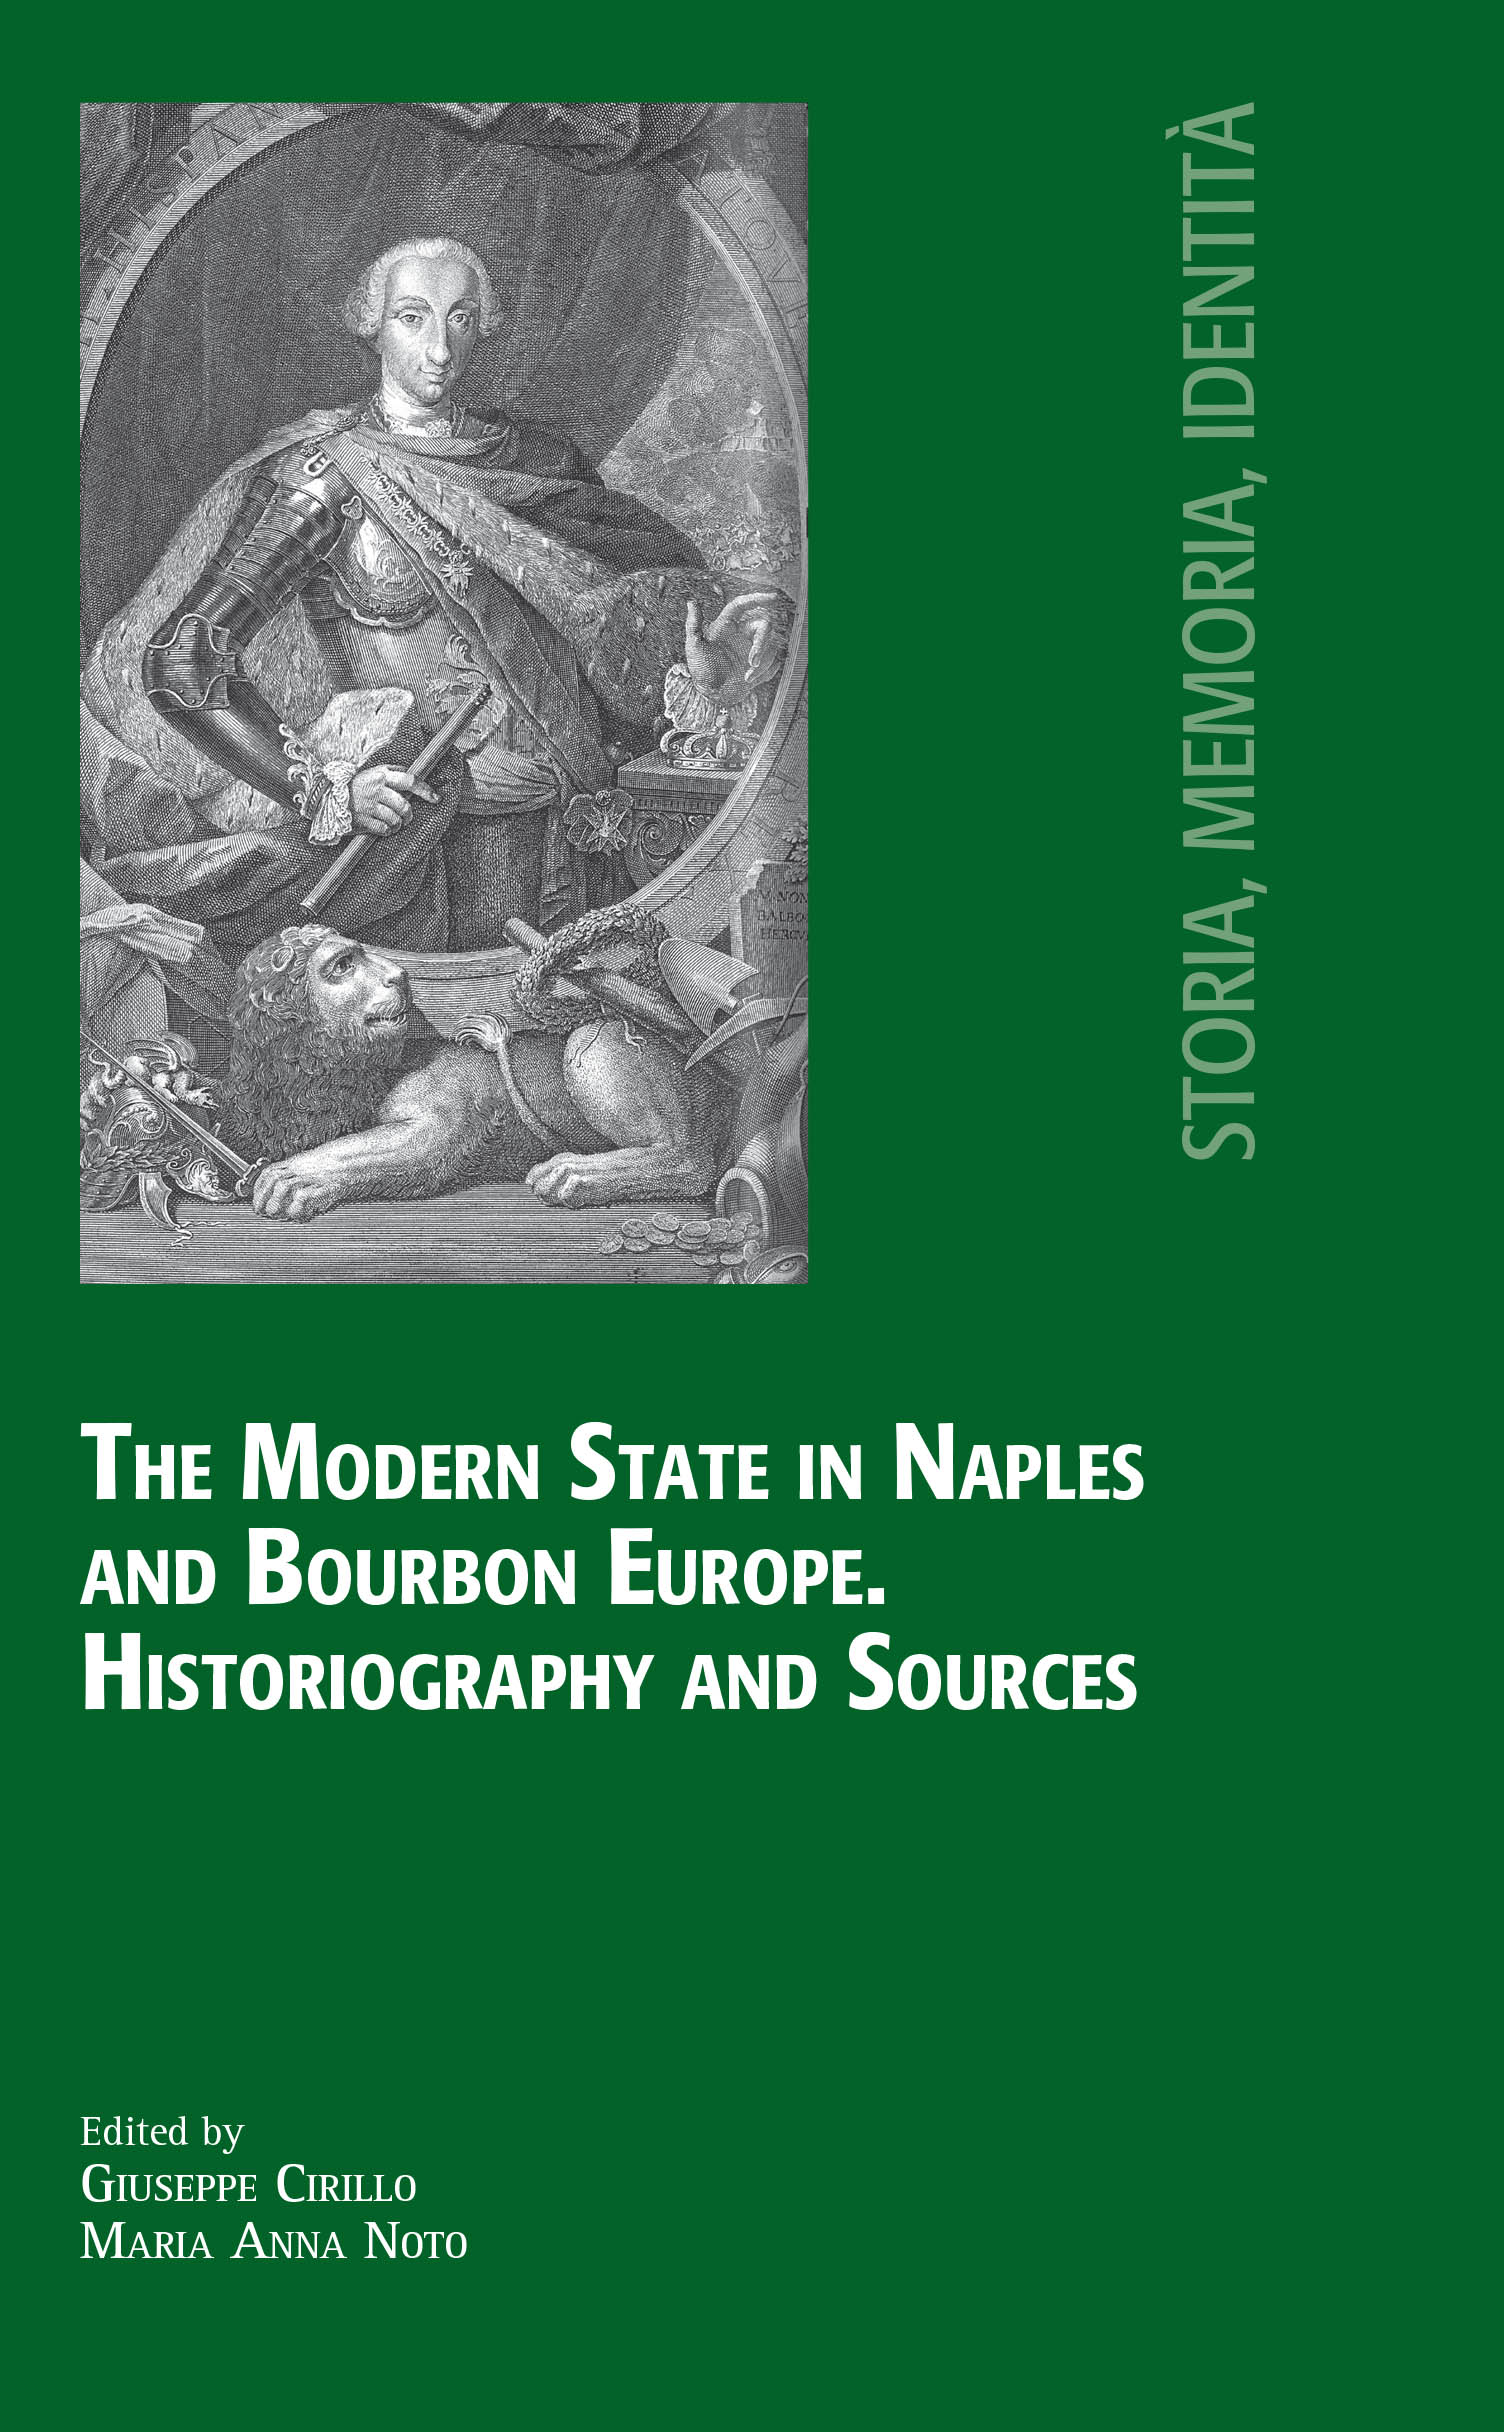 Imagen de portada del libro The Modern State in Naples and Bourbon Europe. Historiography and Sources